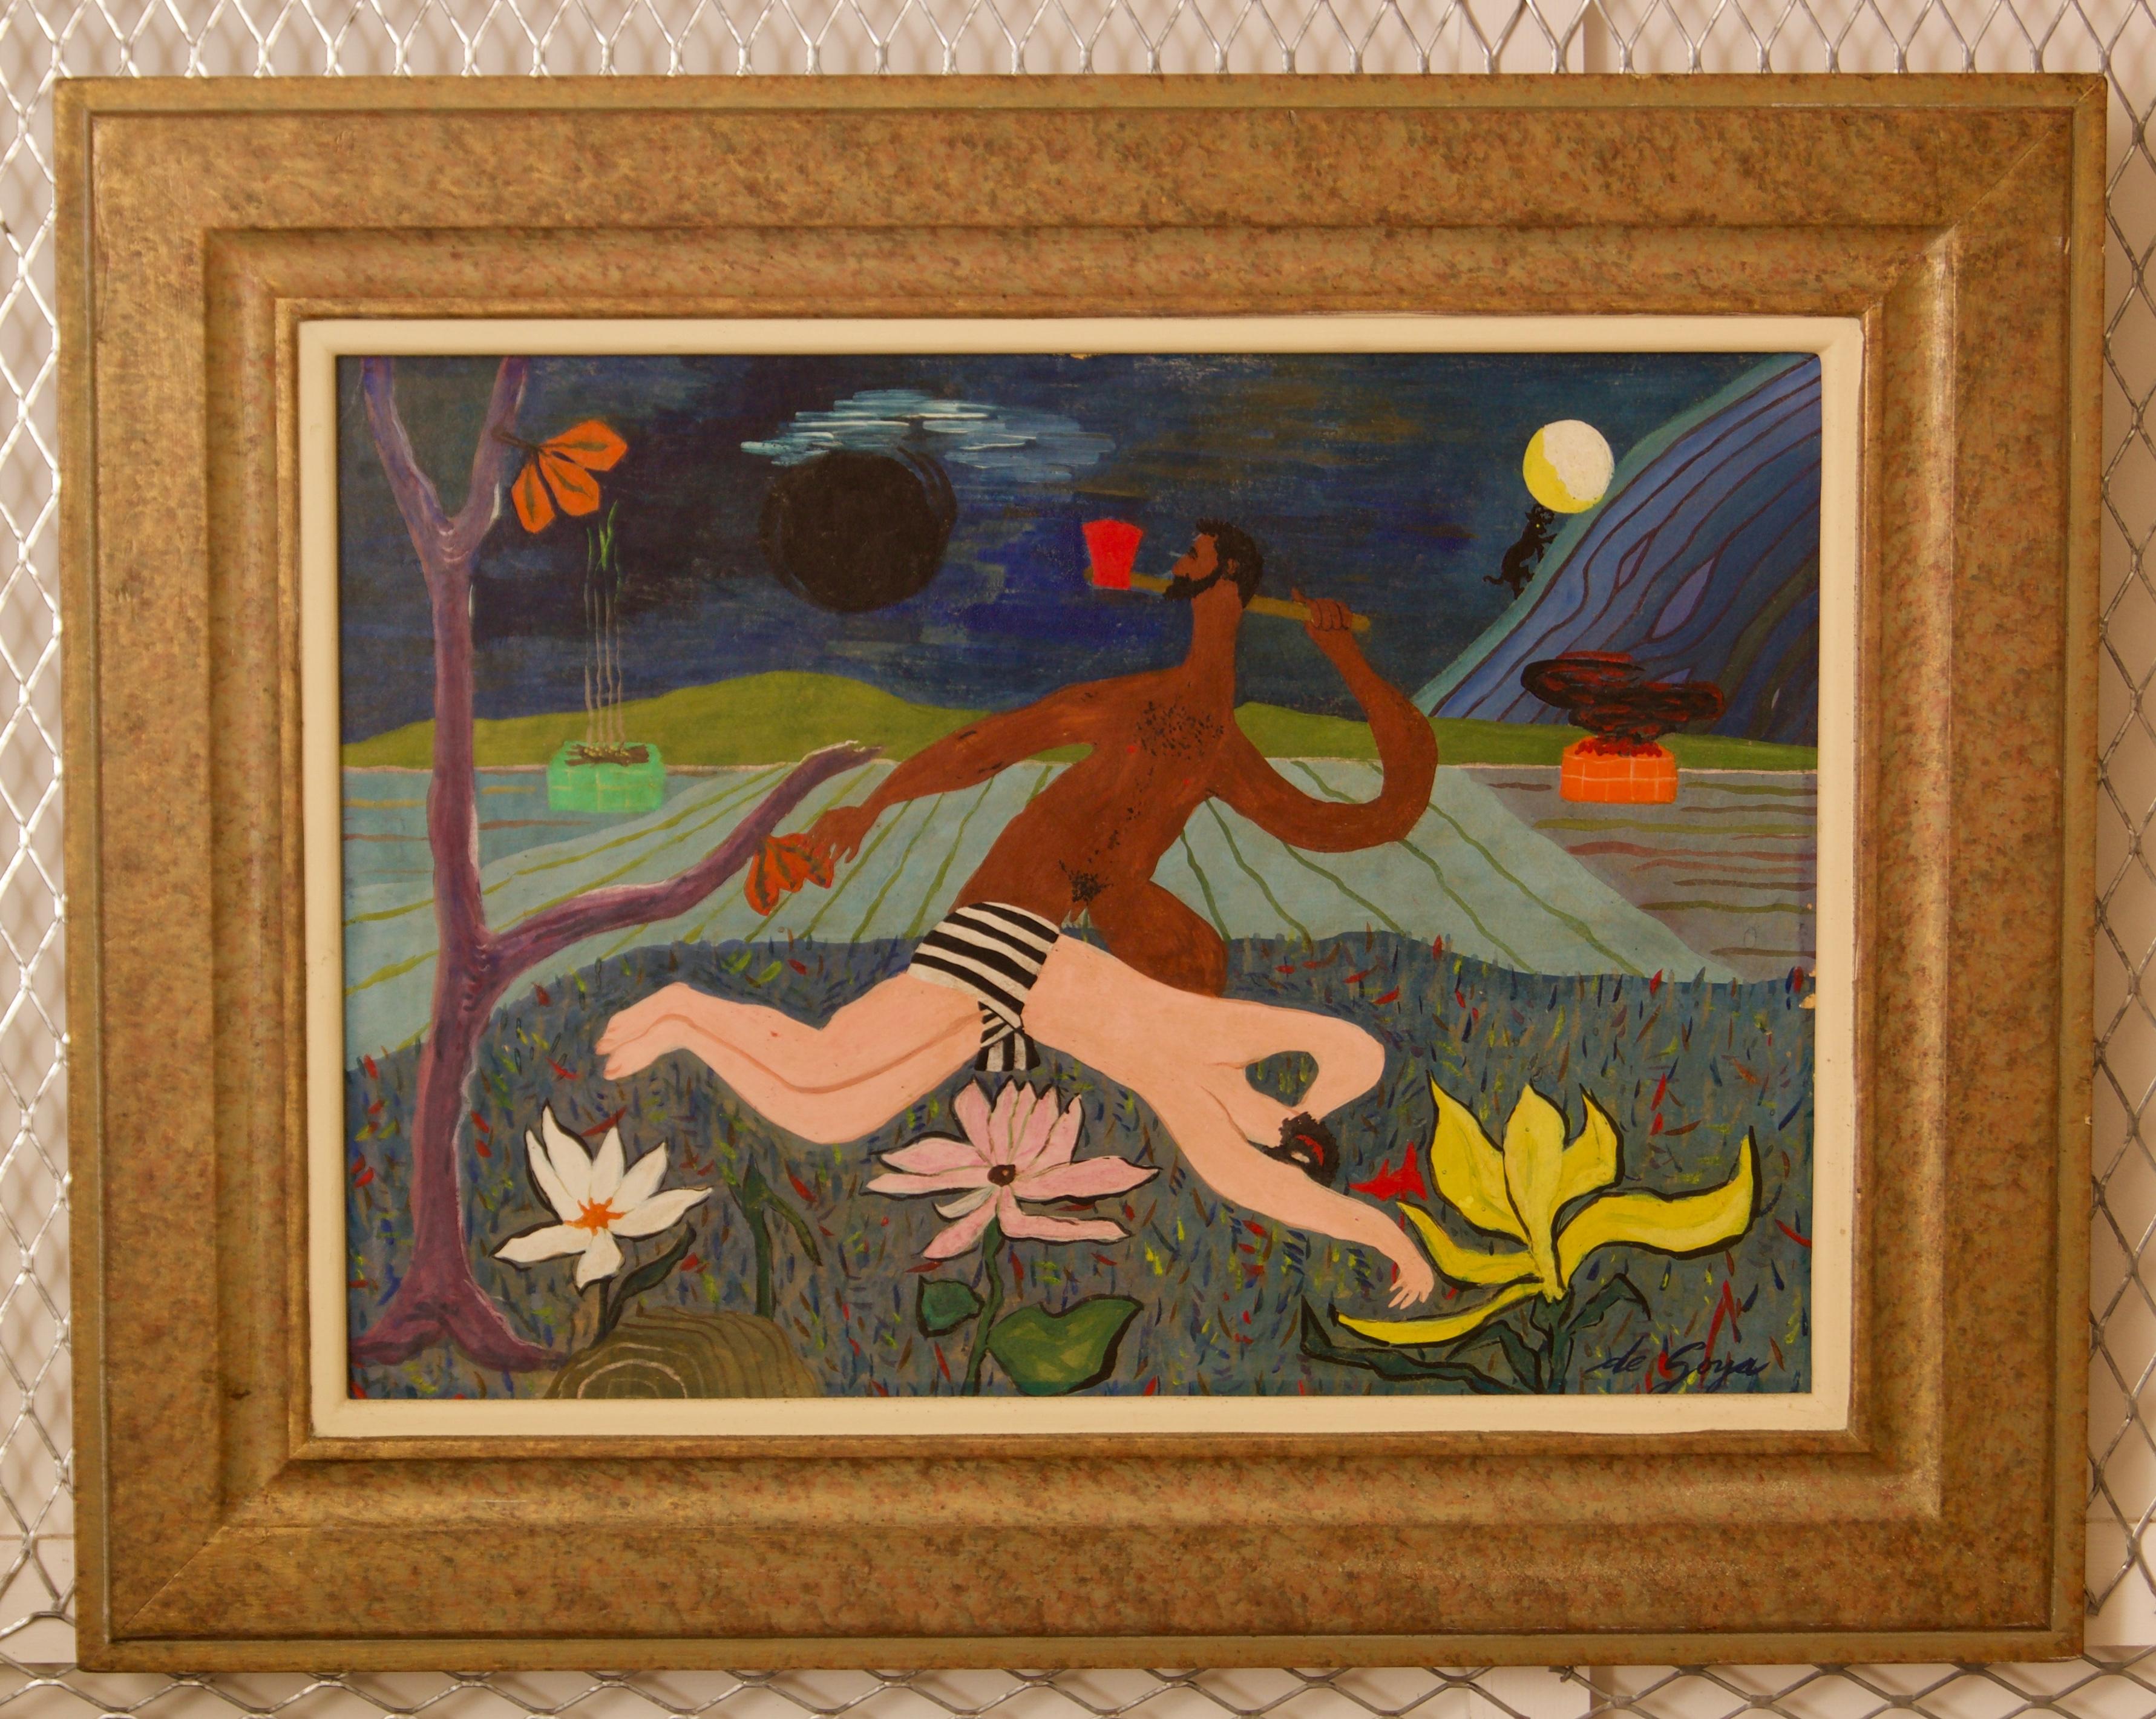 Abstract Nude Garden - Mid 20th Century Mixed Media Abstract Piece - De Goya - Painting by George De Goya